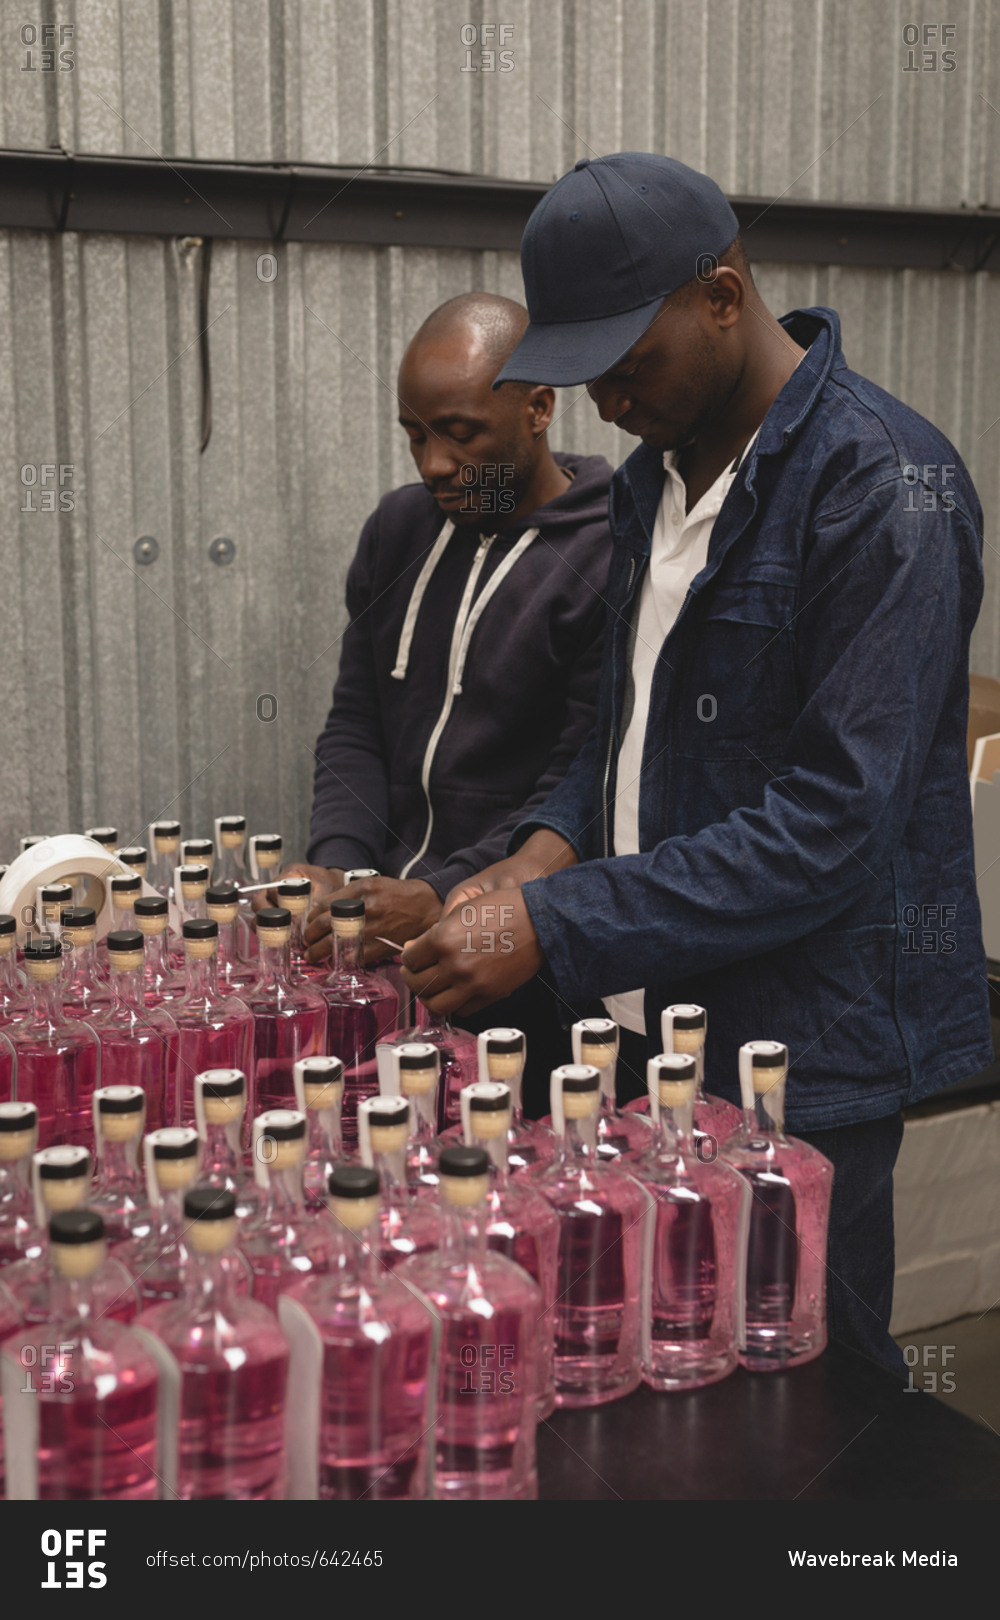 Workers packing gin bottles in the factory